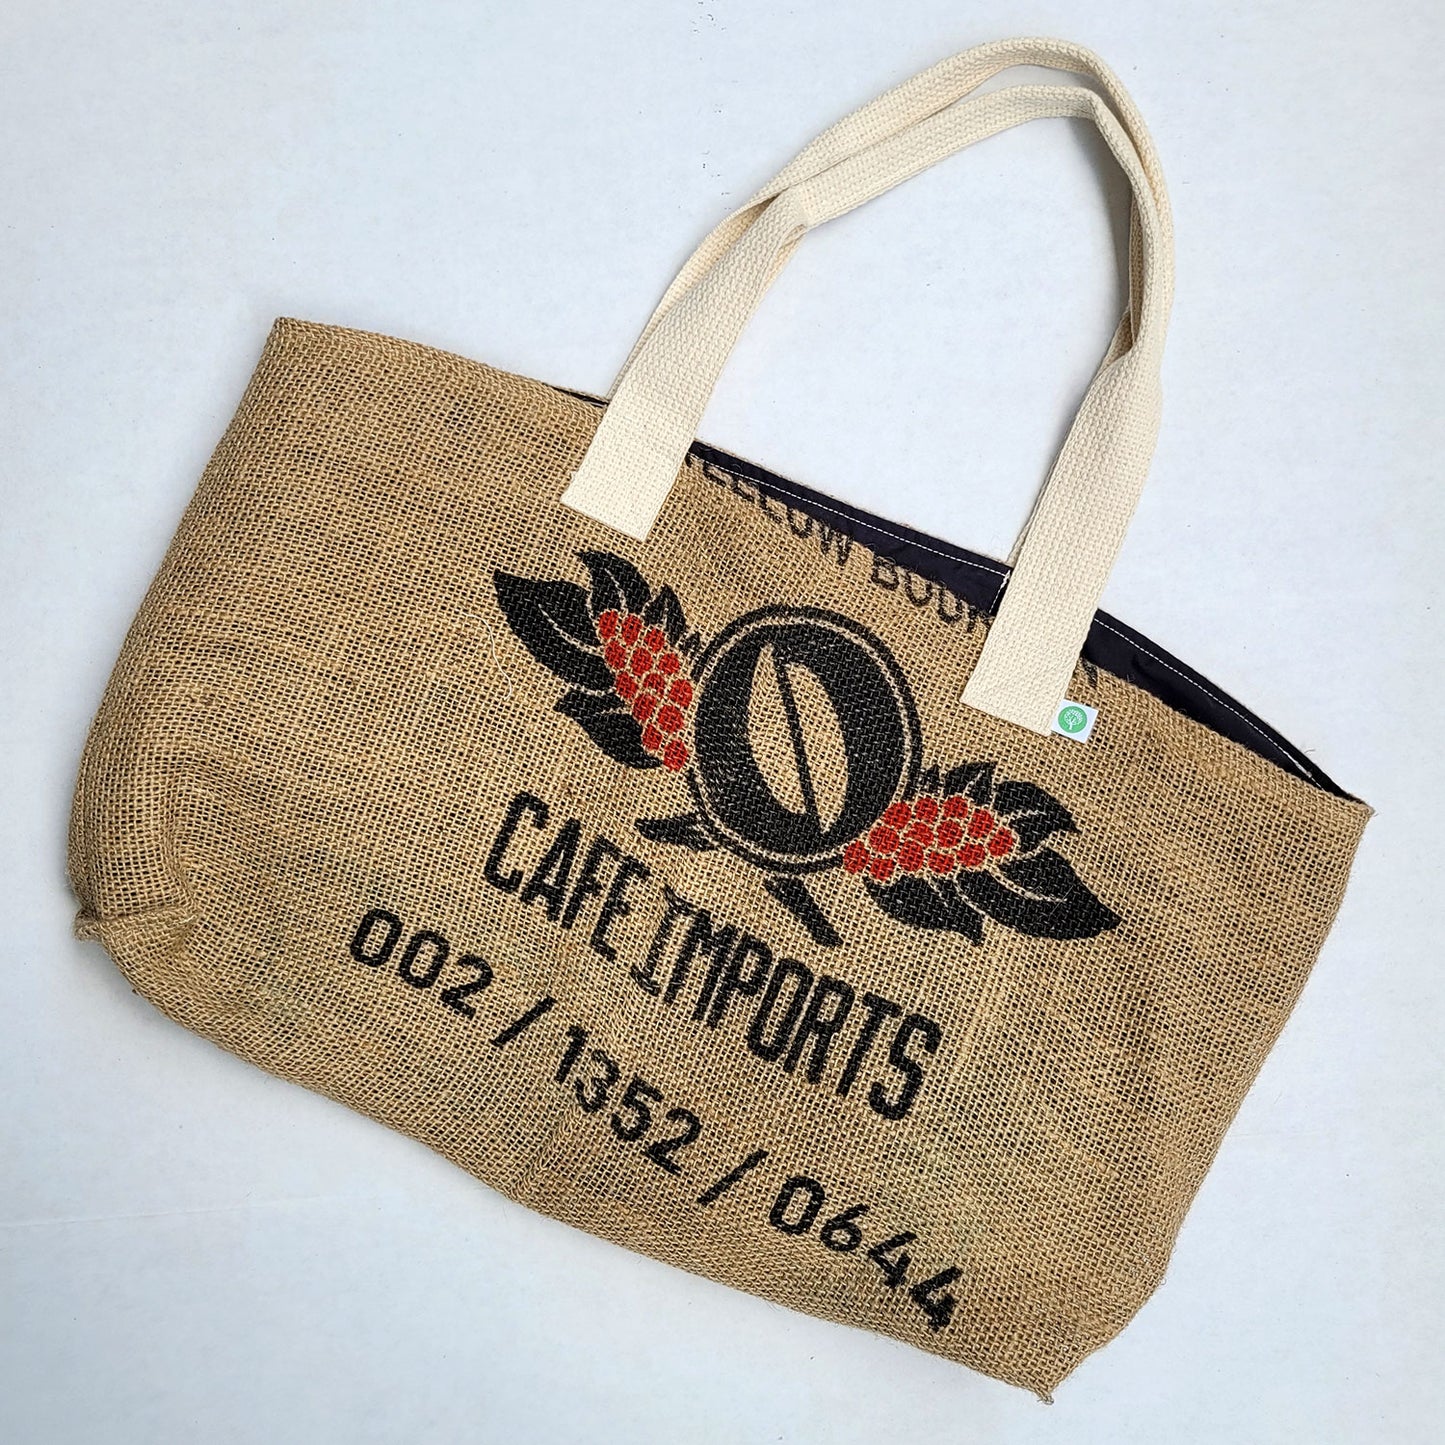 upcycled tote bag - Cafe Imports FRONT